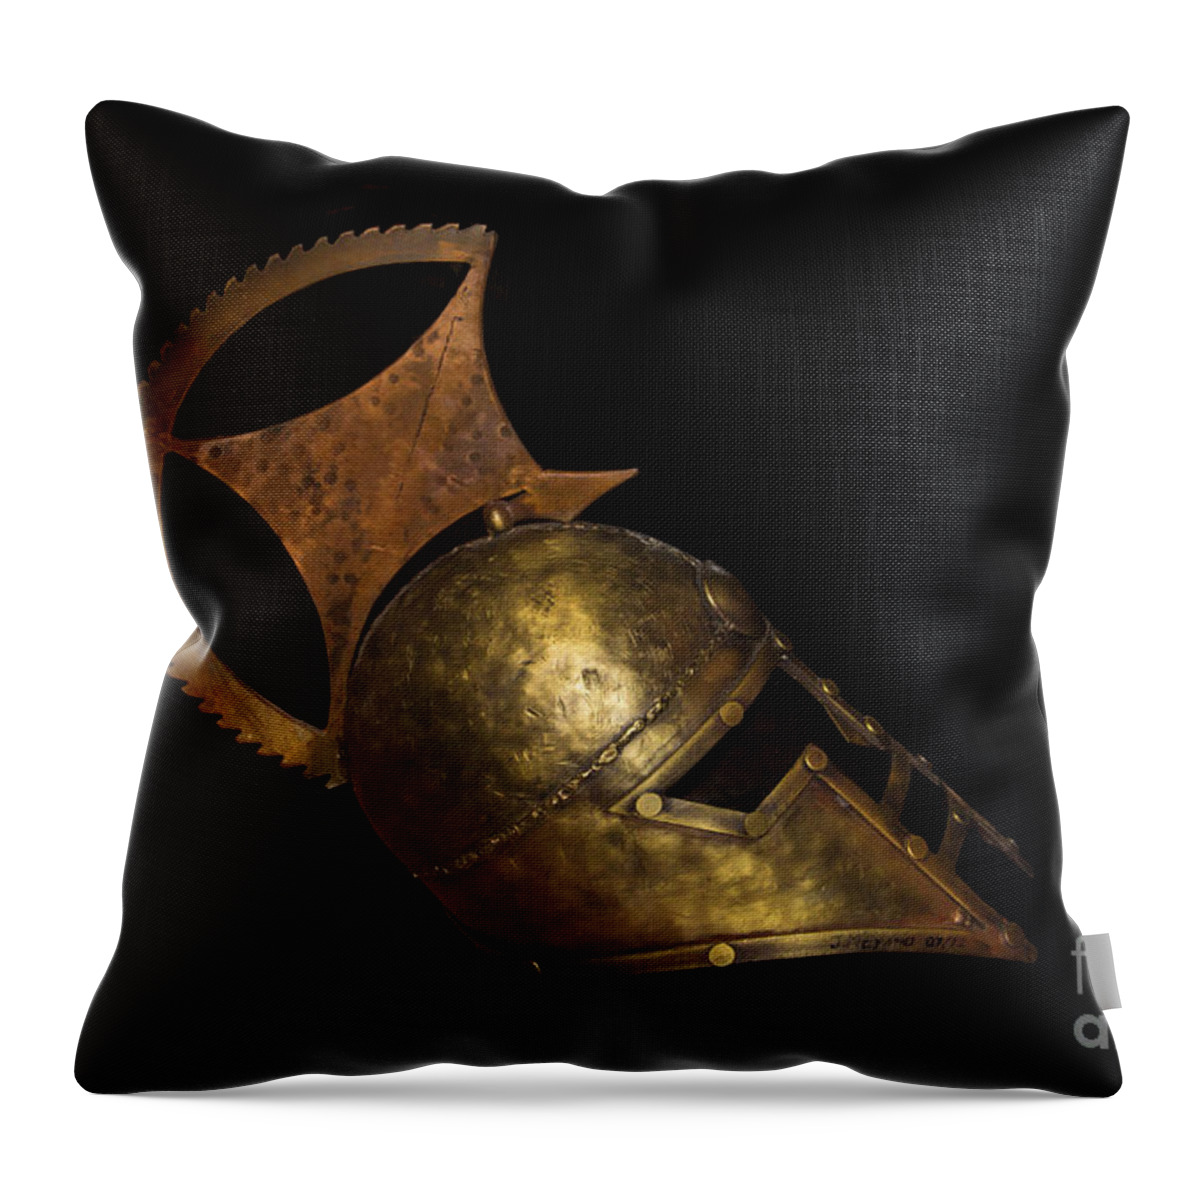 Metal Throw Pillow featuring the photograph Rome Was Not Built In A Day by Al Bourassa